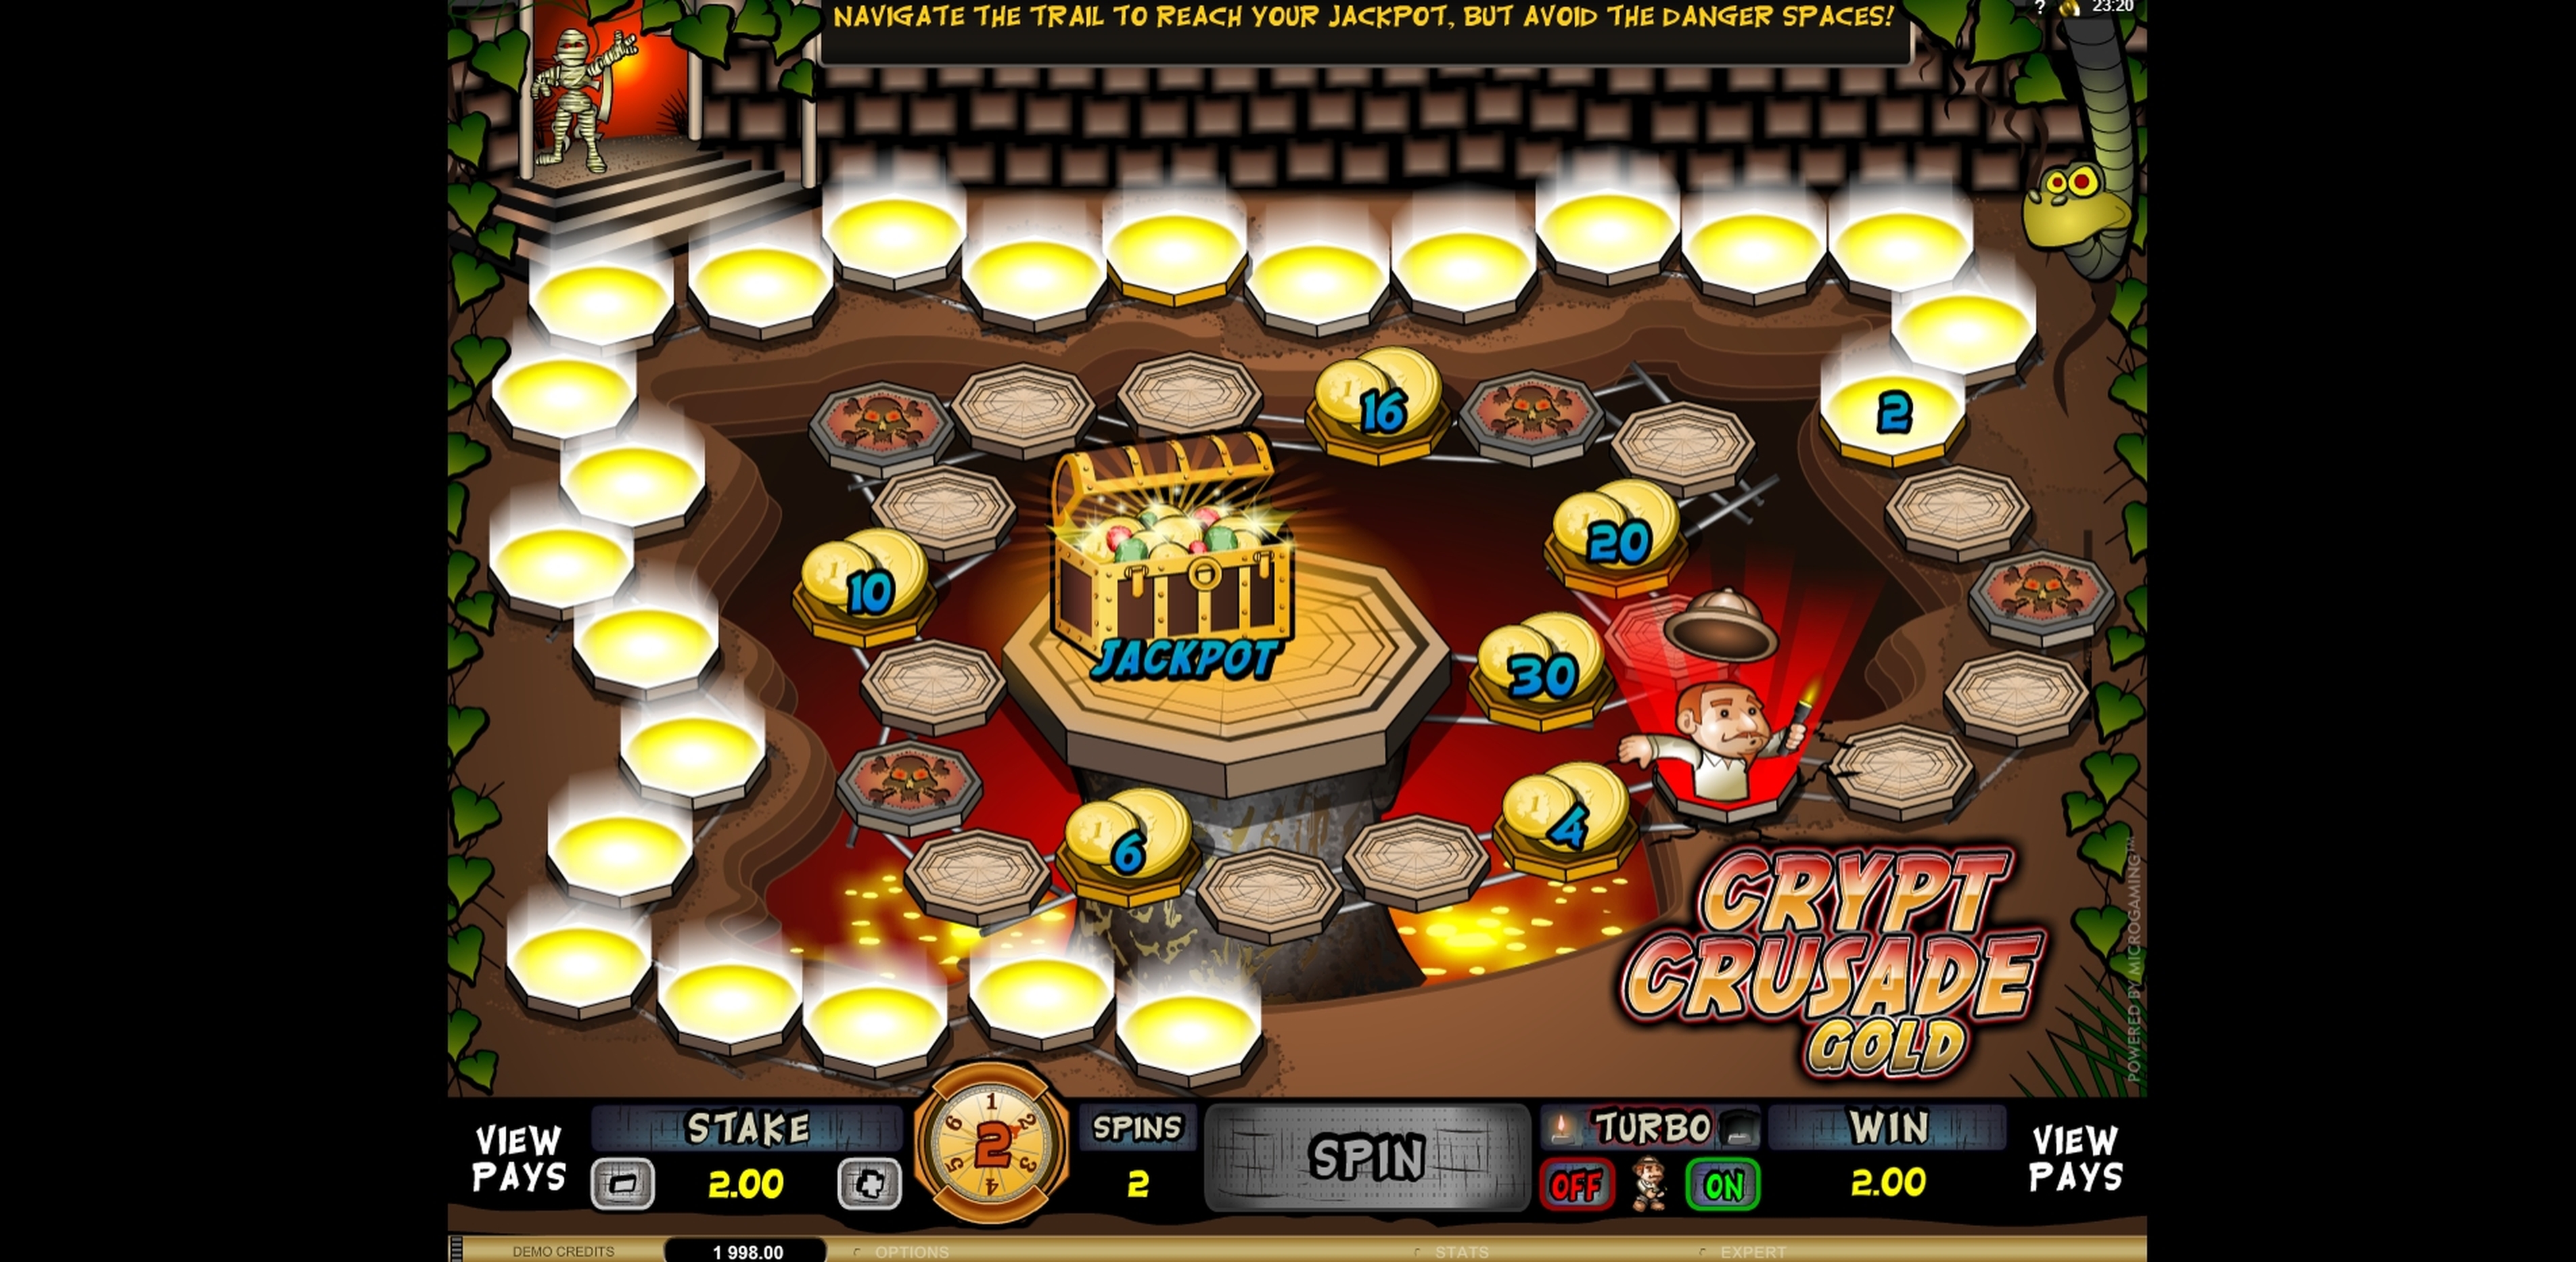 Win Money in Crypt Crusade Gold Free Slot Game by Microgaming